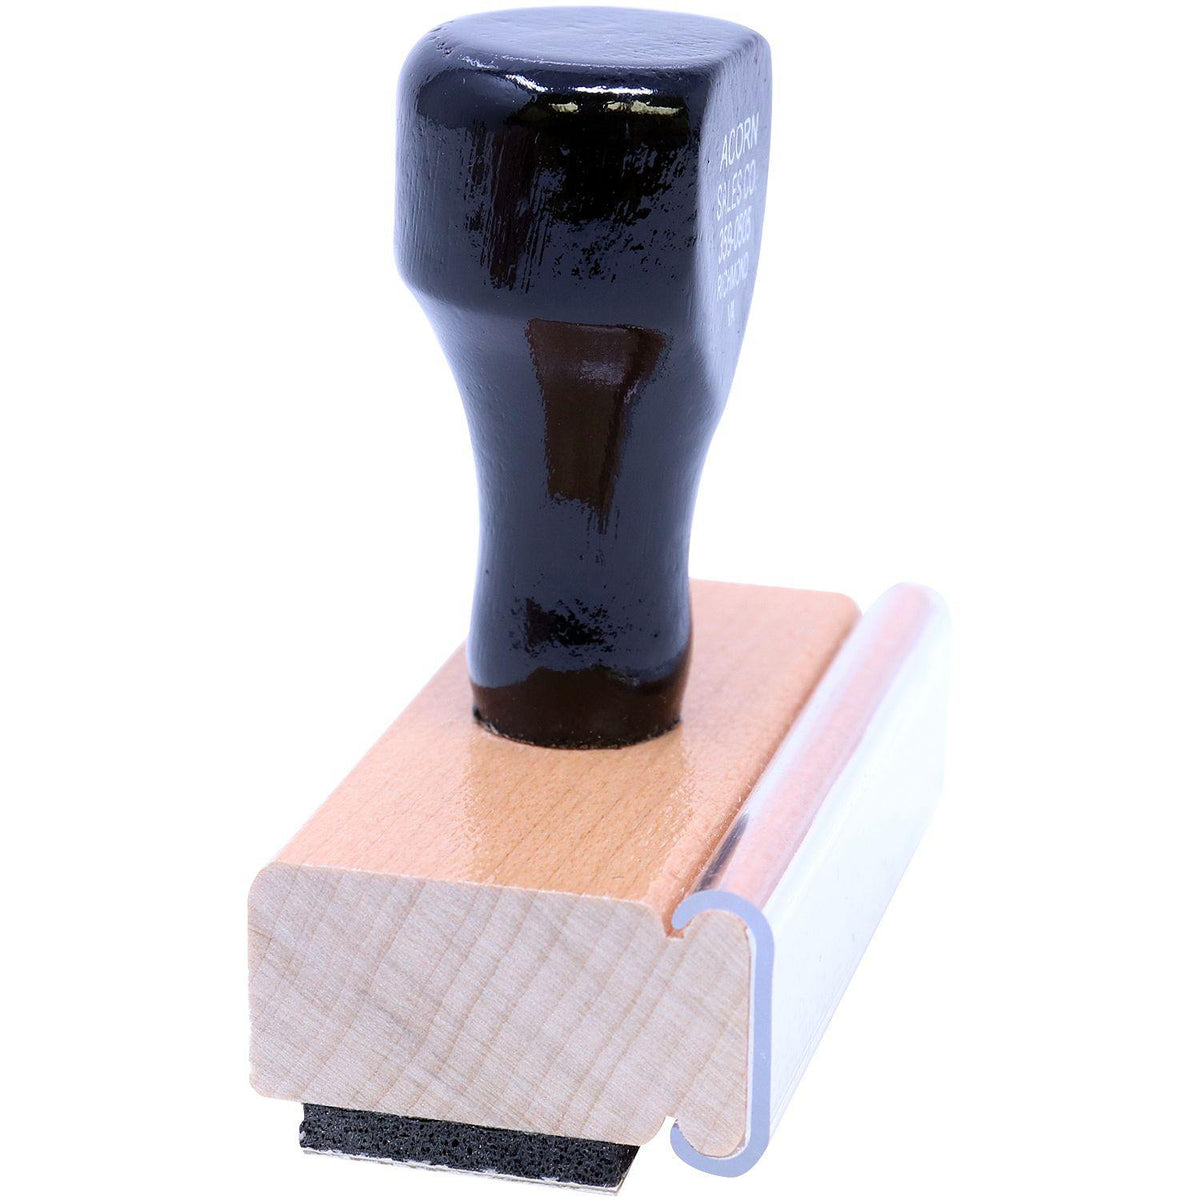 Side View of Large No Homework Turned In Rubber Stamp at an Angle